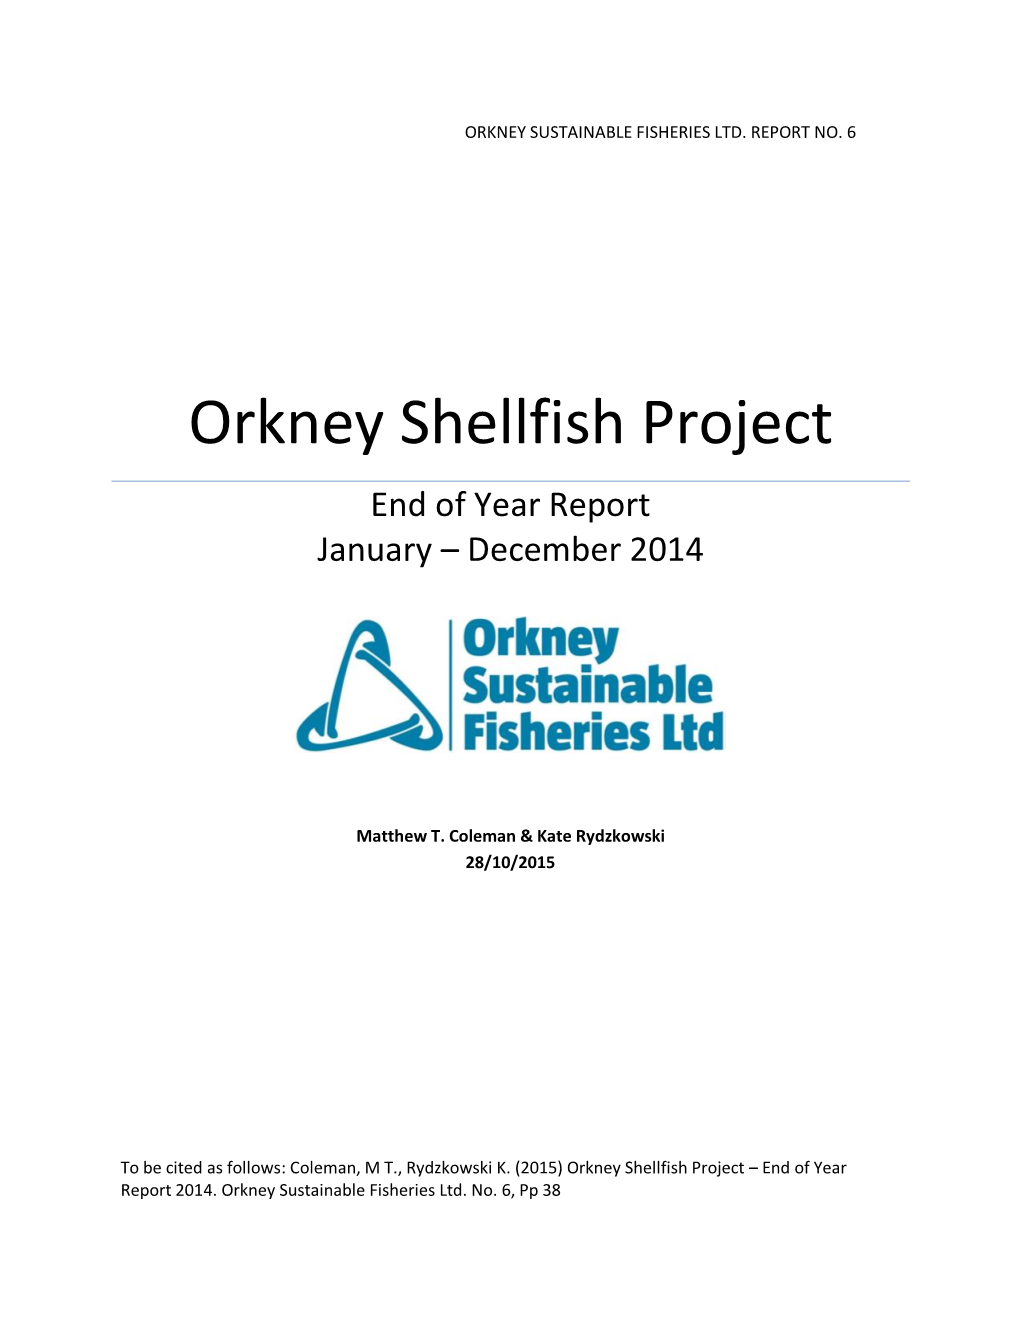 Orkney Sustainable Fisheries End of Year Report 2014